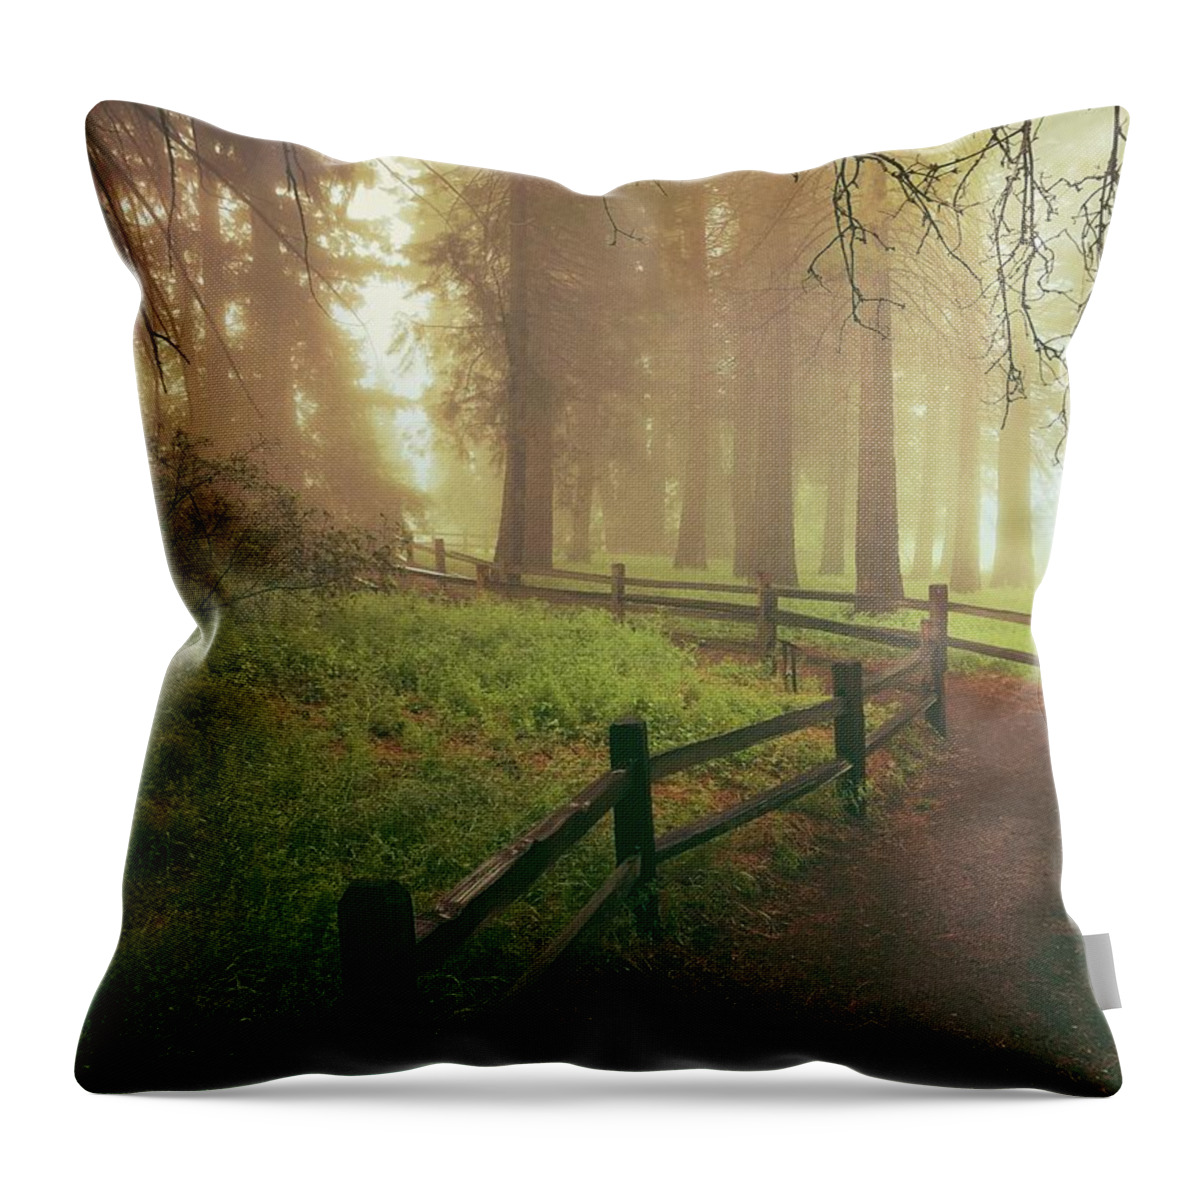 Poppy Throw Pillow featuring the digital art Misty Trail by Kevyn Bashore